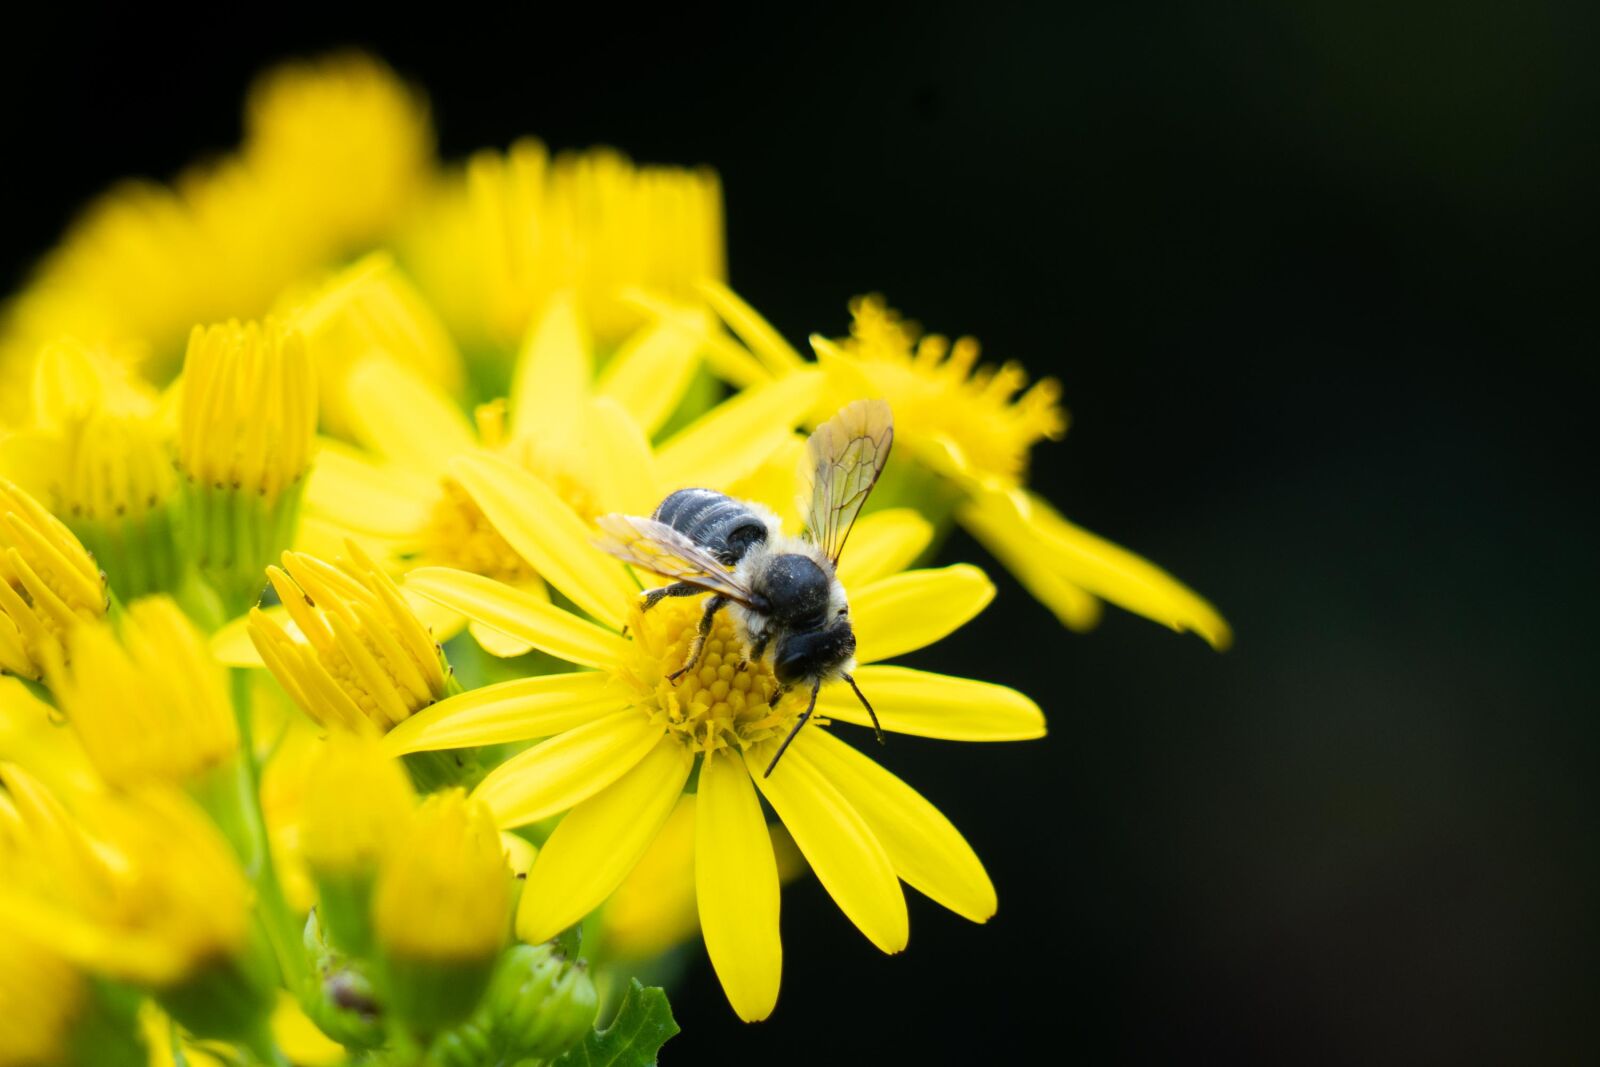 Sony a6300 sample photo. Mining bee, bee, flower photography